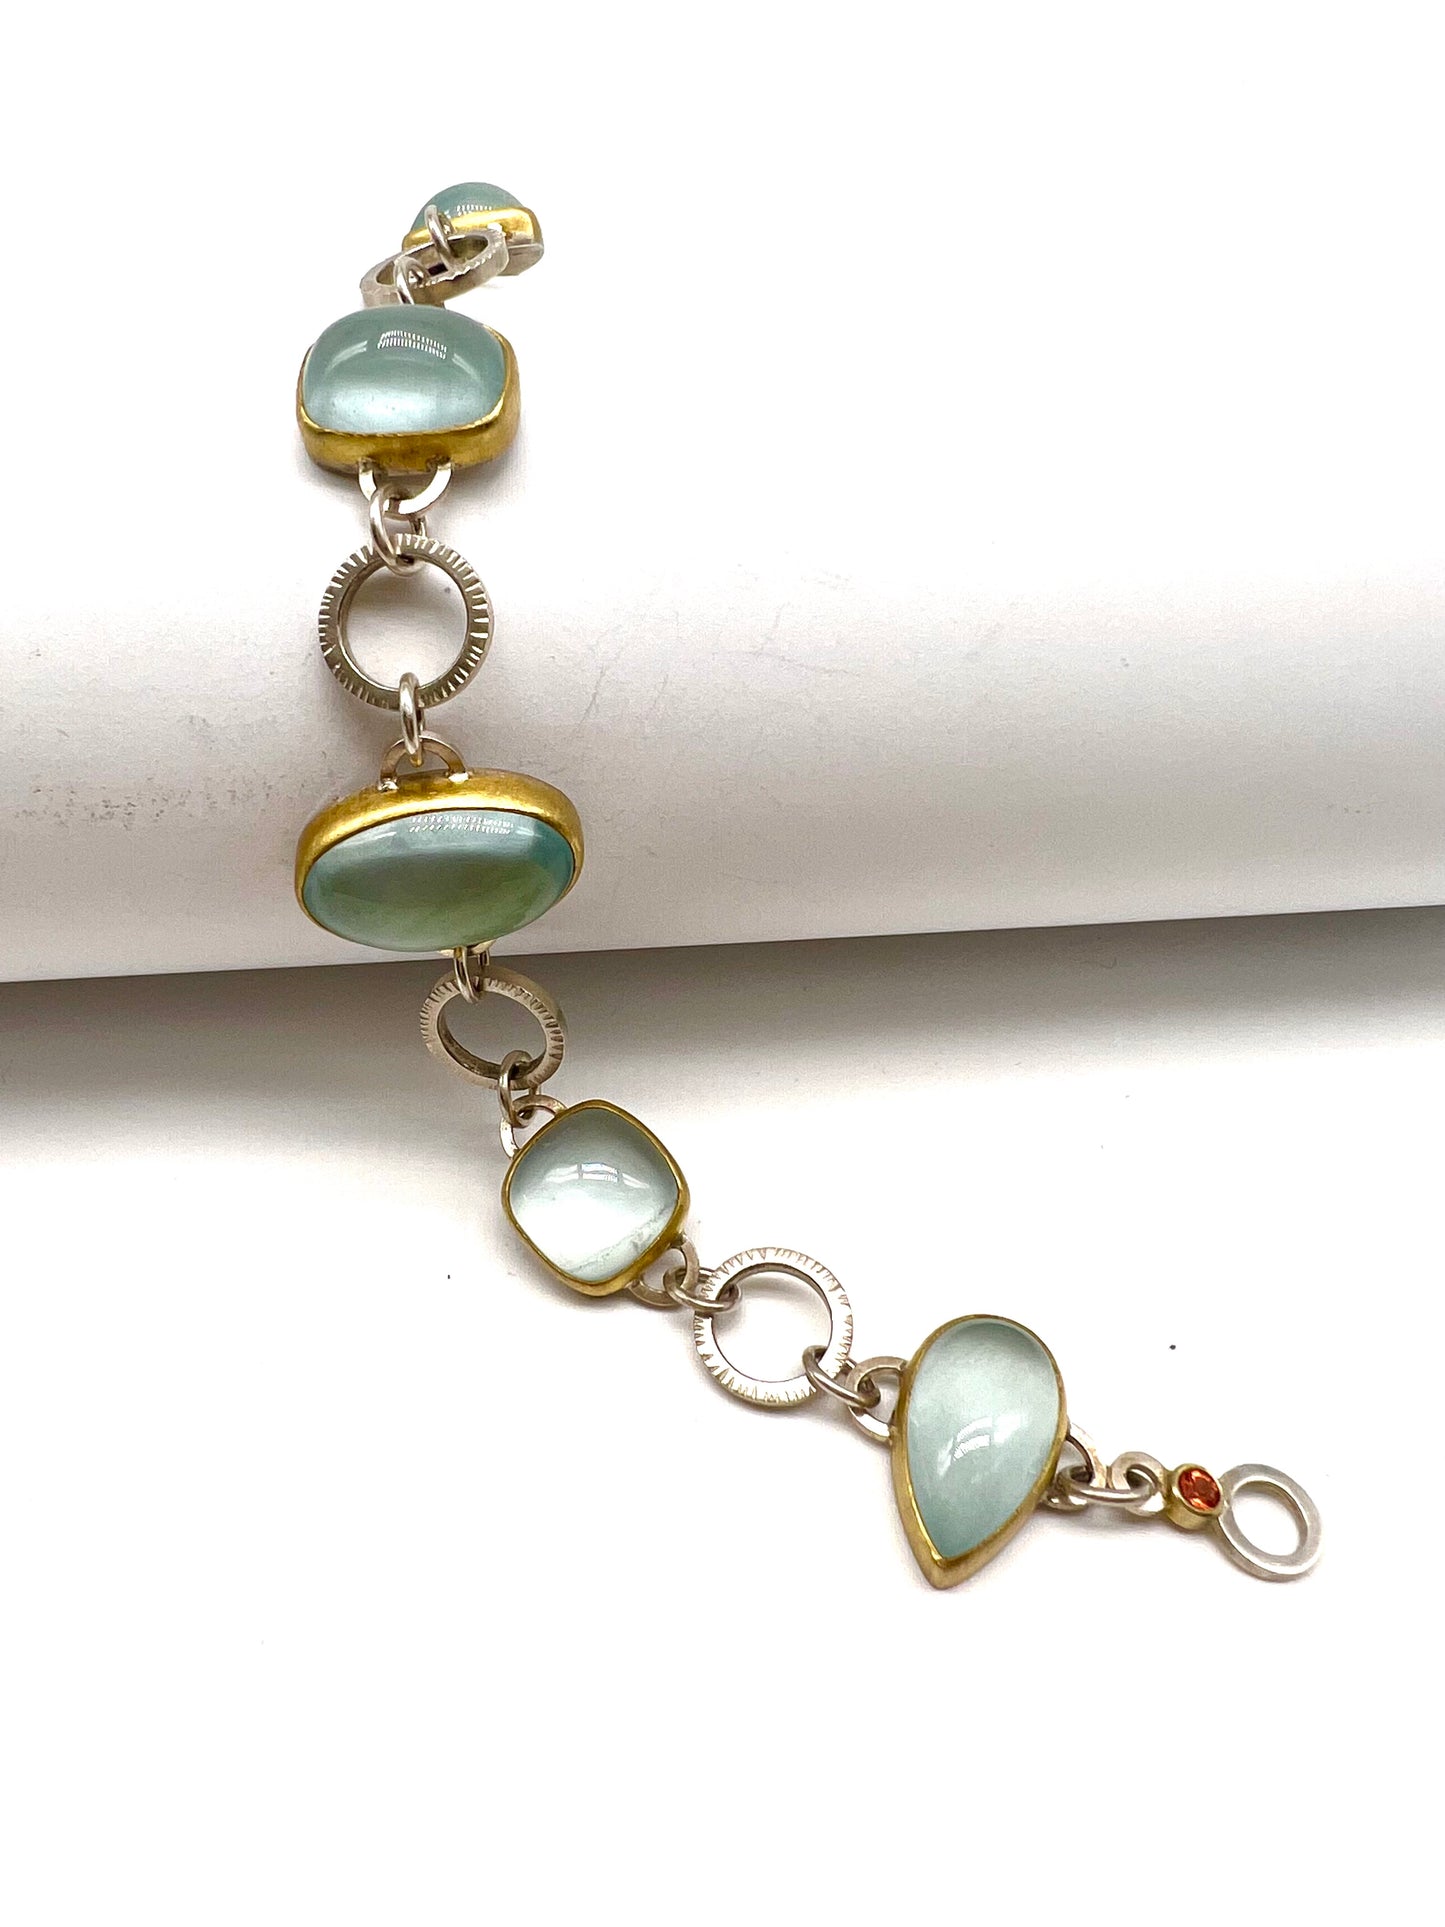 Cabochon Aquamarine, Orange Sapphire, 22kt Yellow Gold and Sterling Silver link bracelet